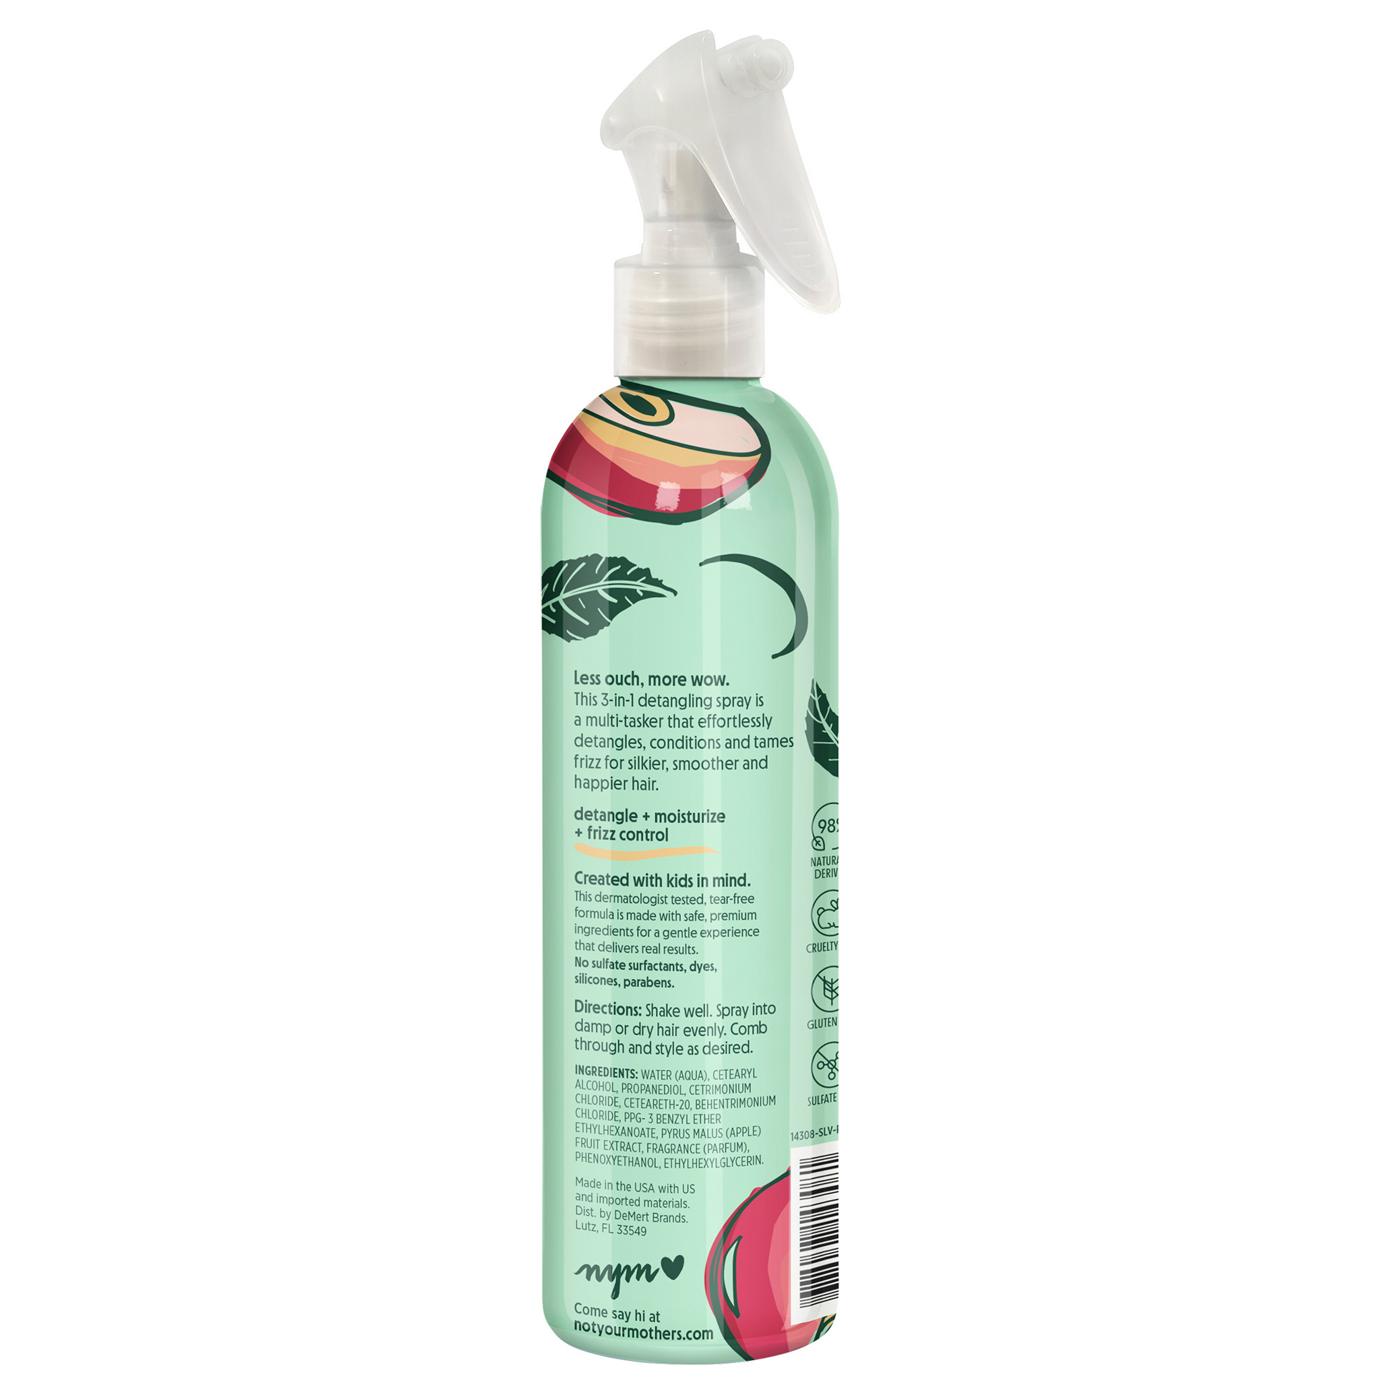 Not Your Mother's Tear Free Daily Care 3-in-1 Detangler; image 2 of 2